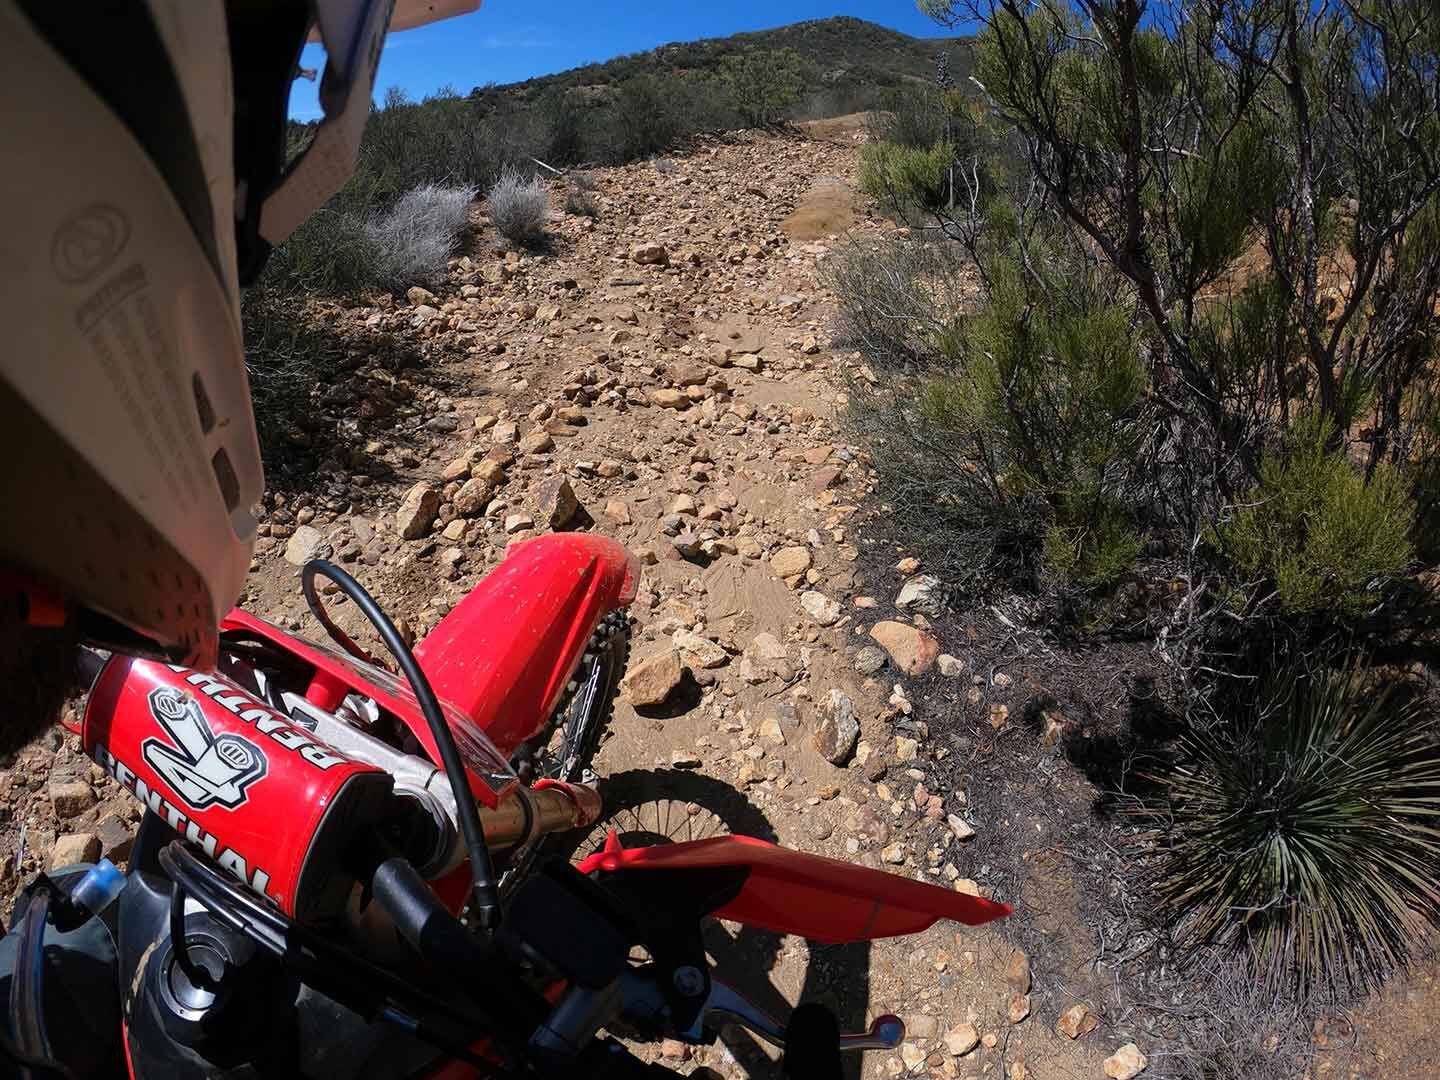 Despite firm-ish suspension settings, the CRF250RX is surprisingly versatile and able to tackle a variety of terrain.